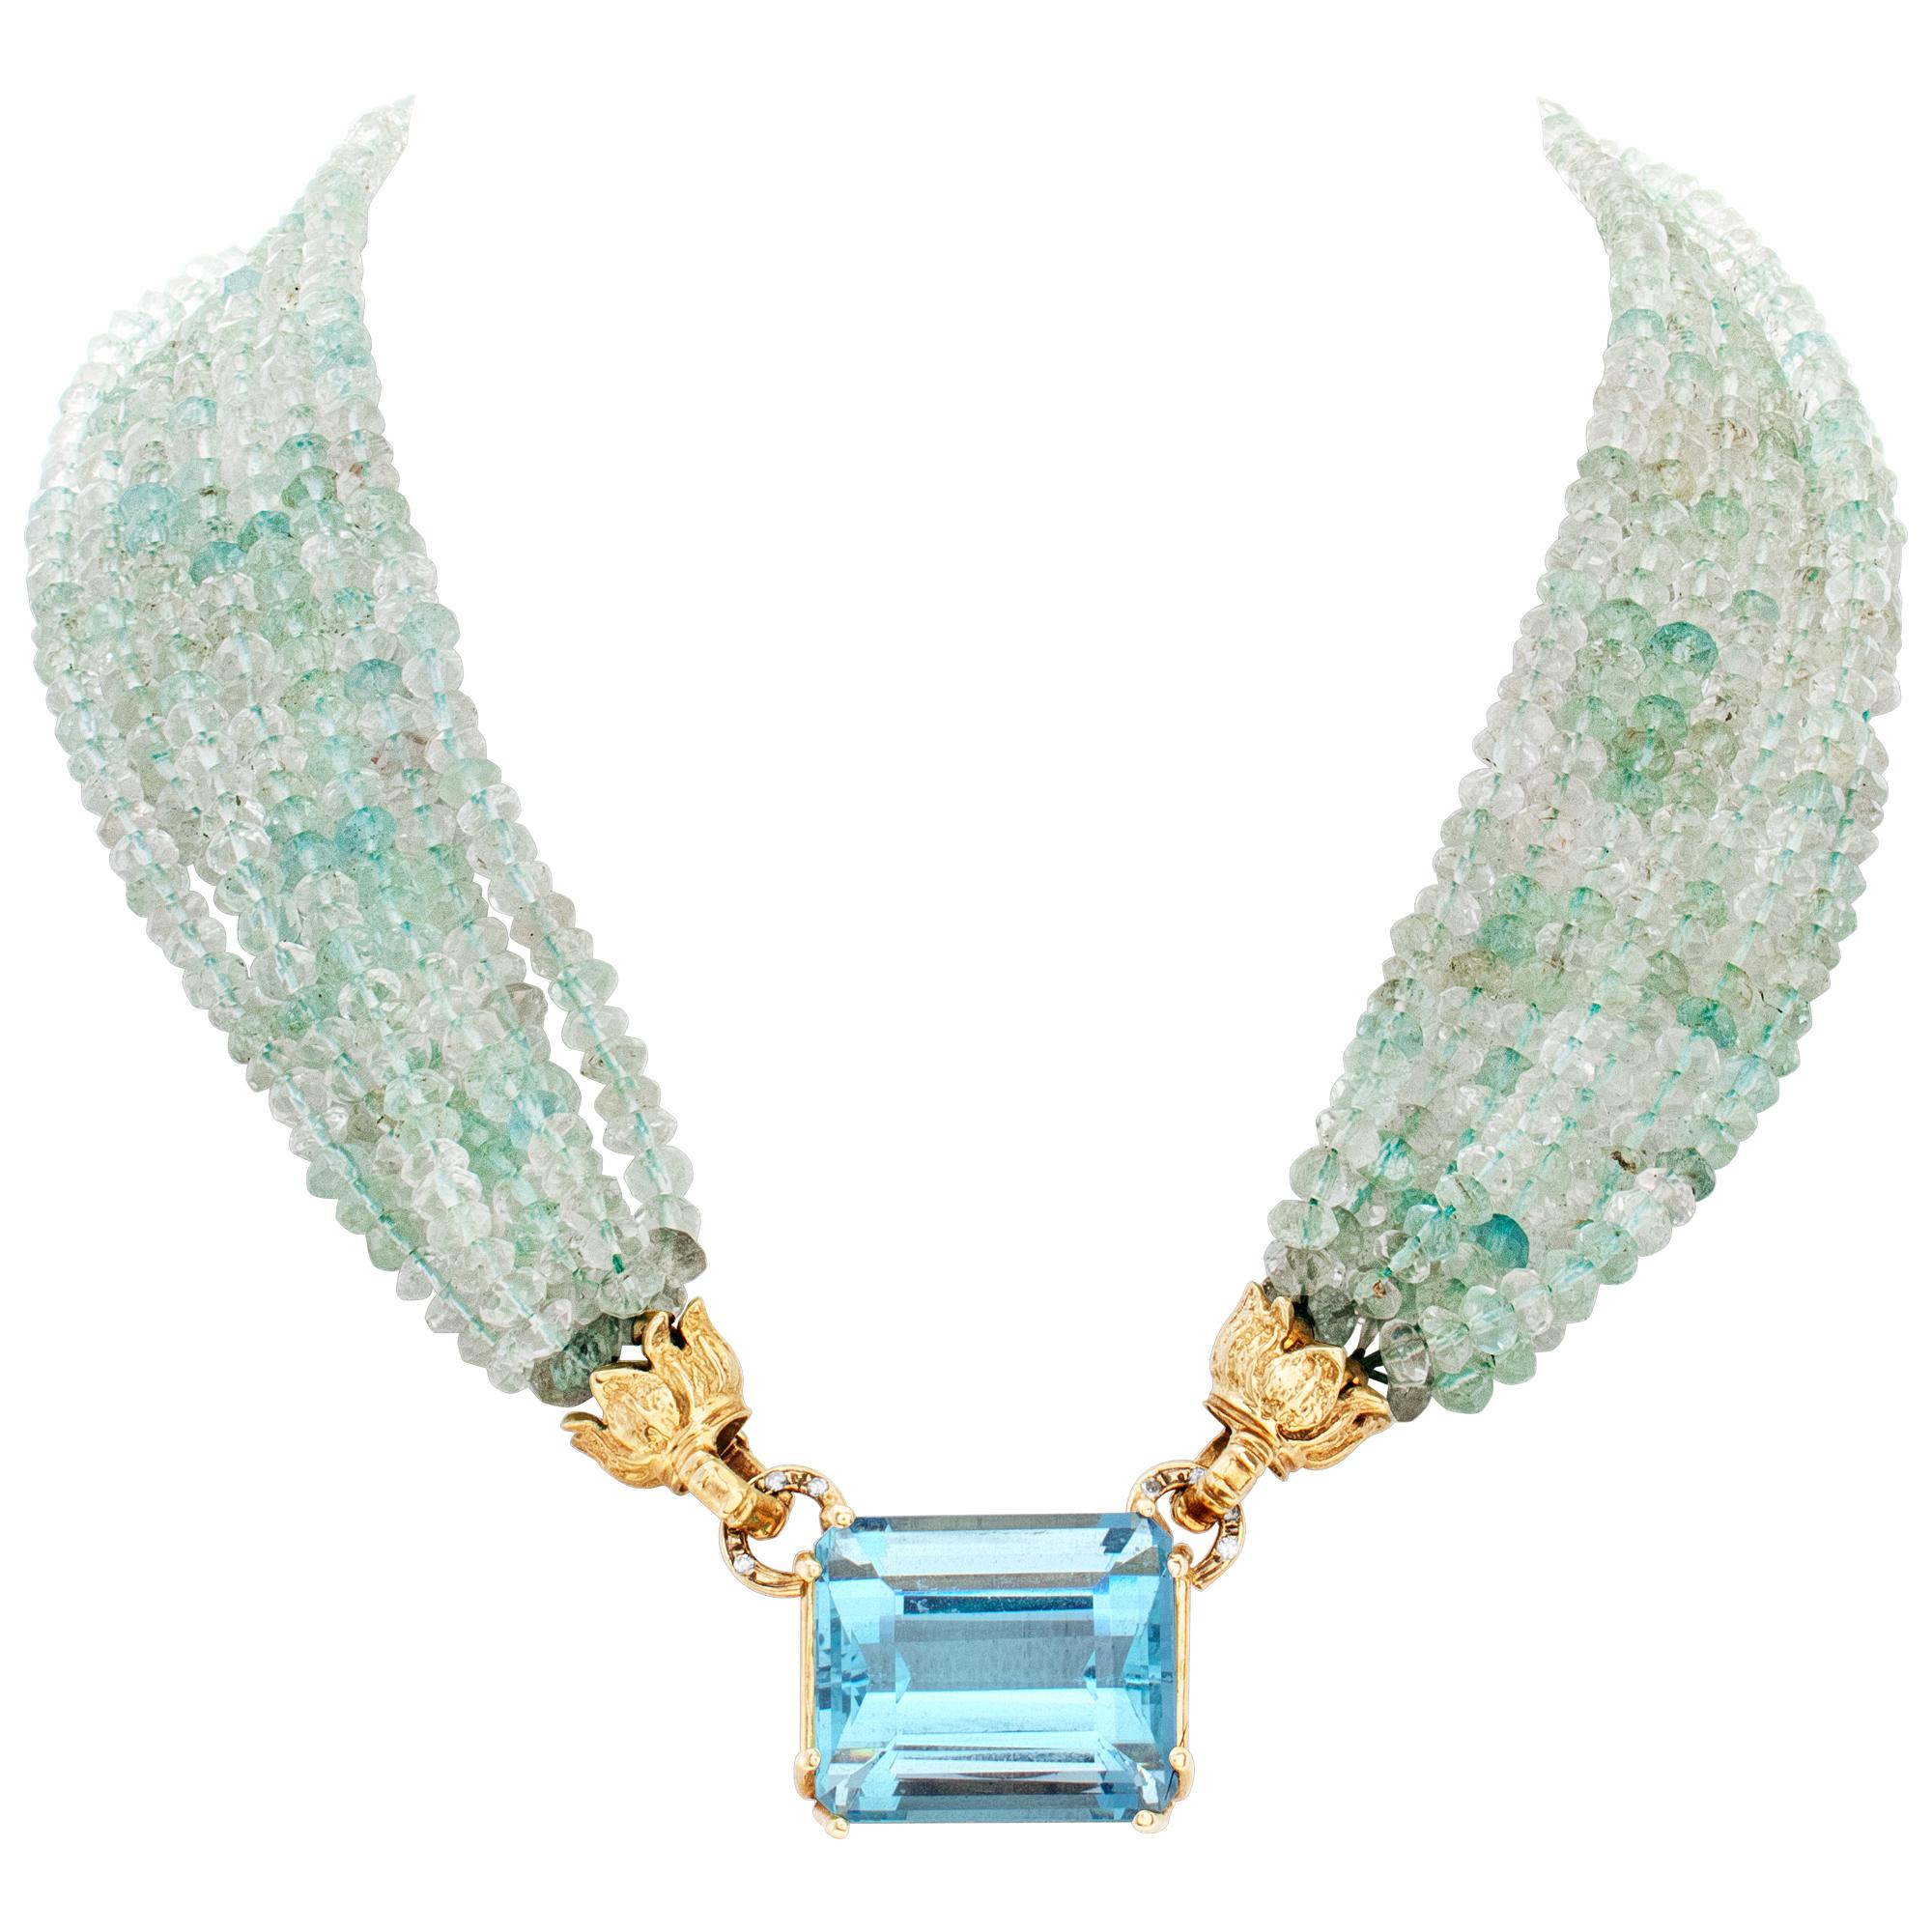 Over 12 carats center emerald cut natural gem-quality Aquamarine (from the Santa Maria mines in Brazil) set in 14K yellow gold, with 7 strands of 5 x 5.5 mm aquamarine beads necklace, set in 14K yellow gold. Center emerald cut gem quality Aquamarine